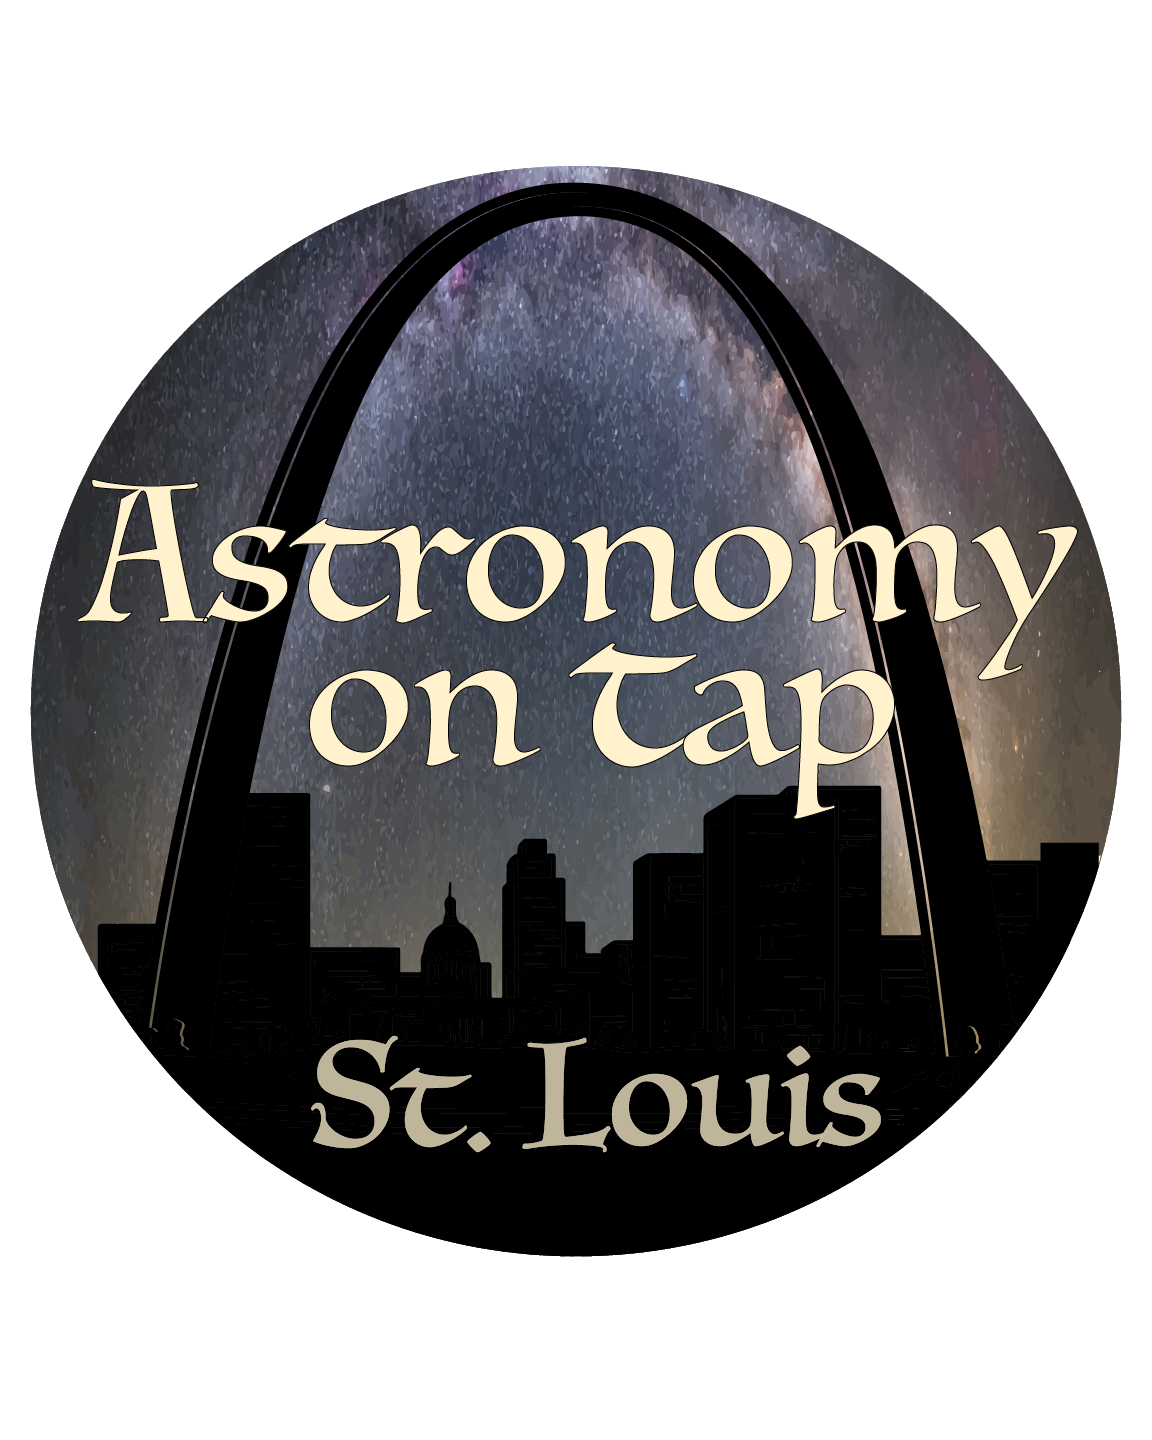 Circular log of Astronomy on Tap - St. Louis, featuring the Milky Way as St. Louis Gateway Arch.